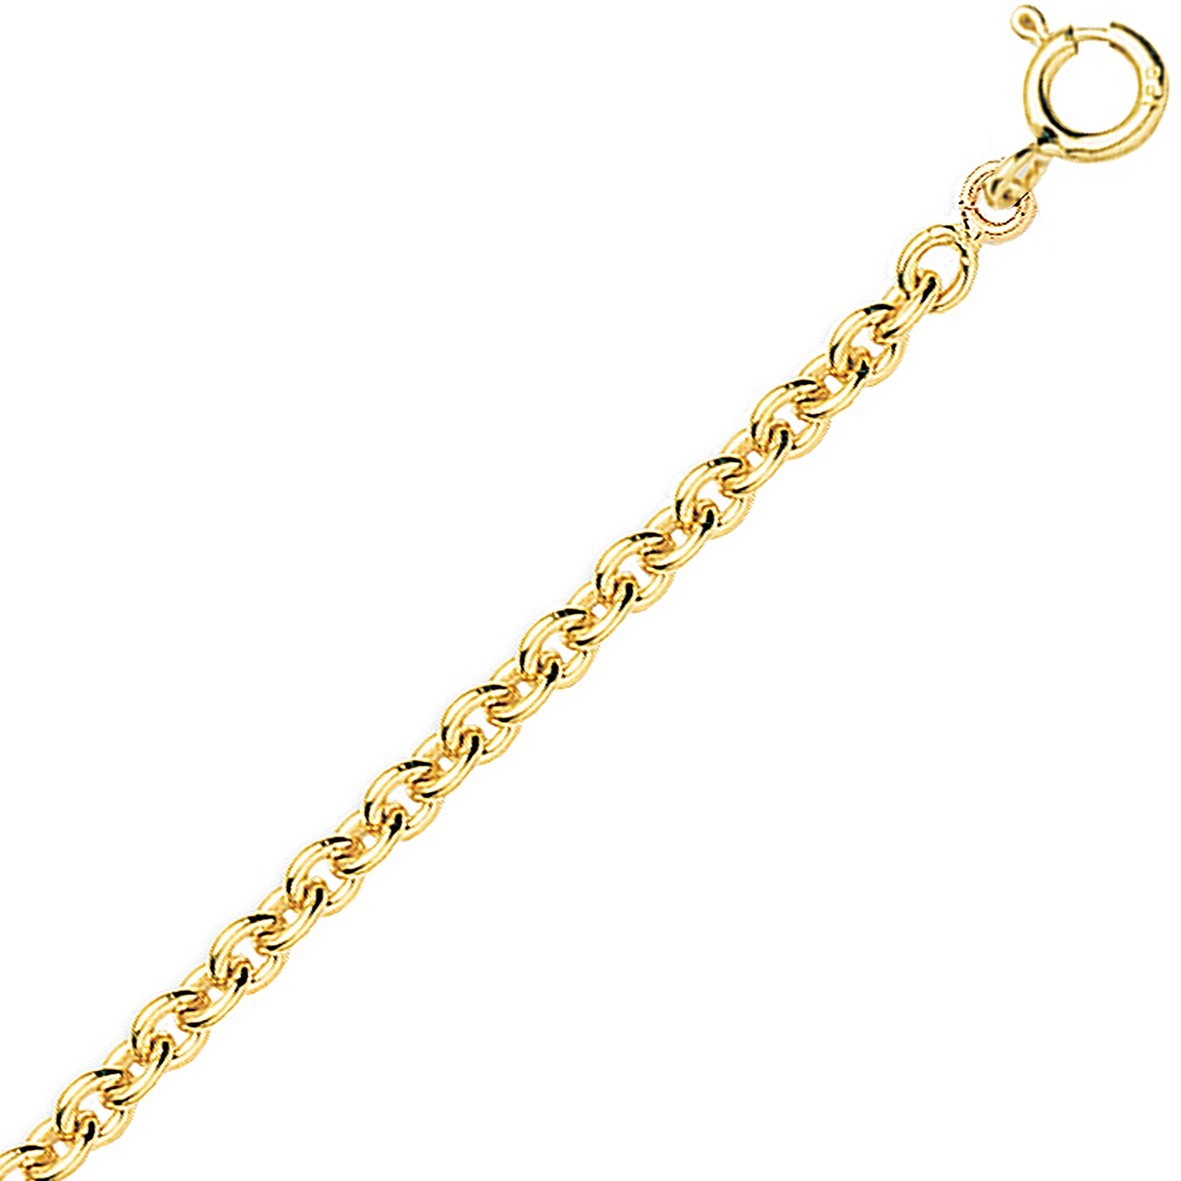 Chaine or jaune 18k maille forçat ronde 1,30mm